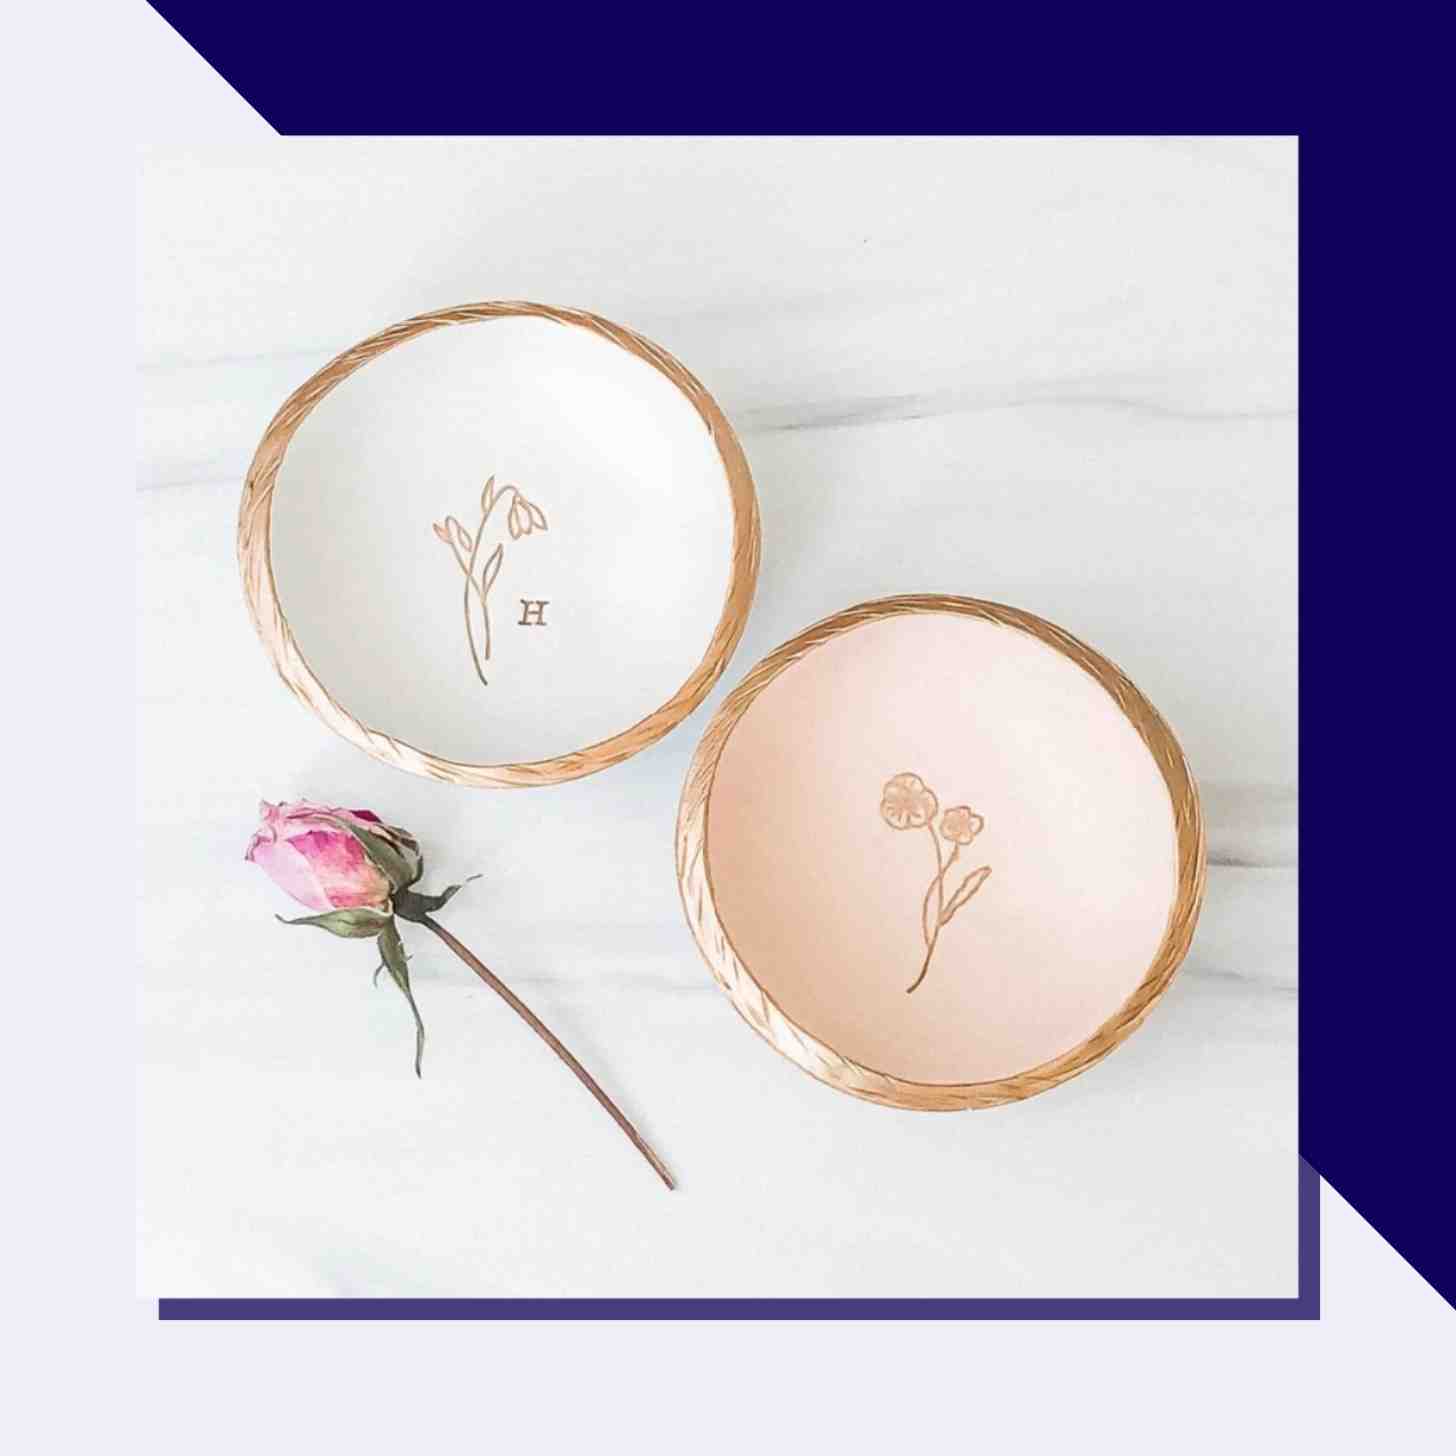 Two Jewerly Dishes With Engravings Inside Displayed On A Table With A Pink Rose